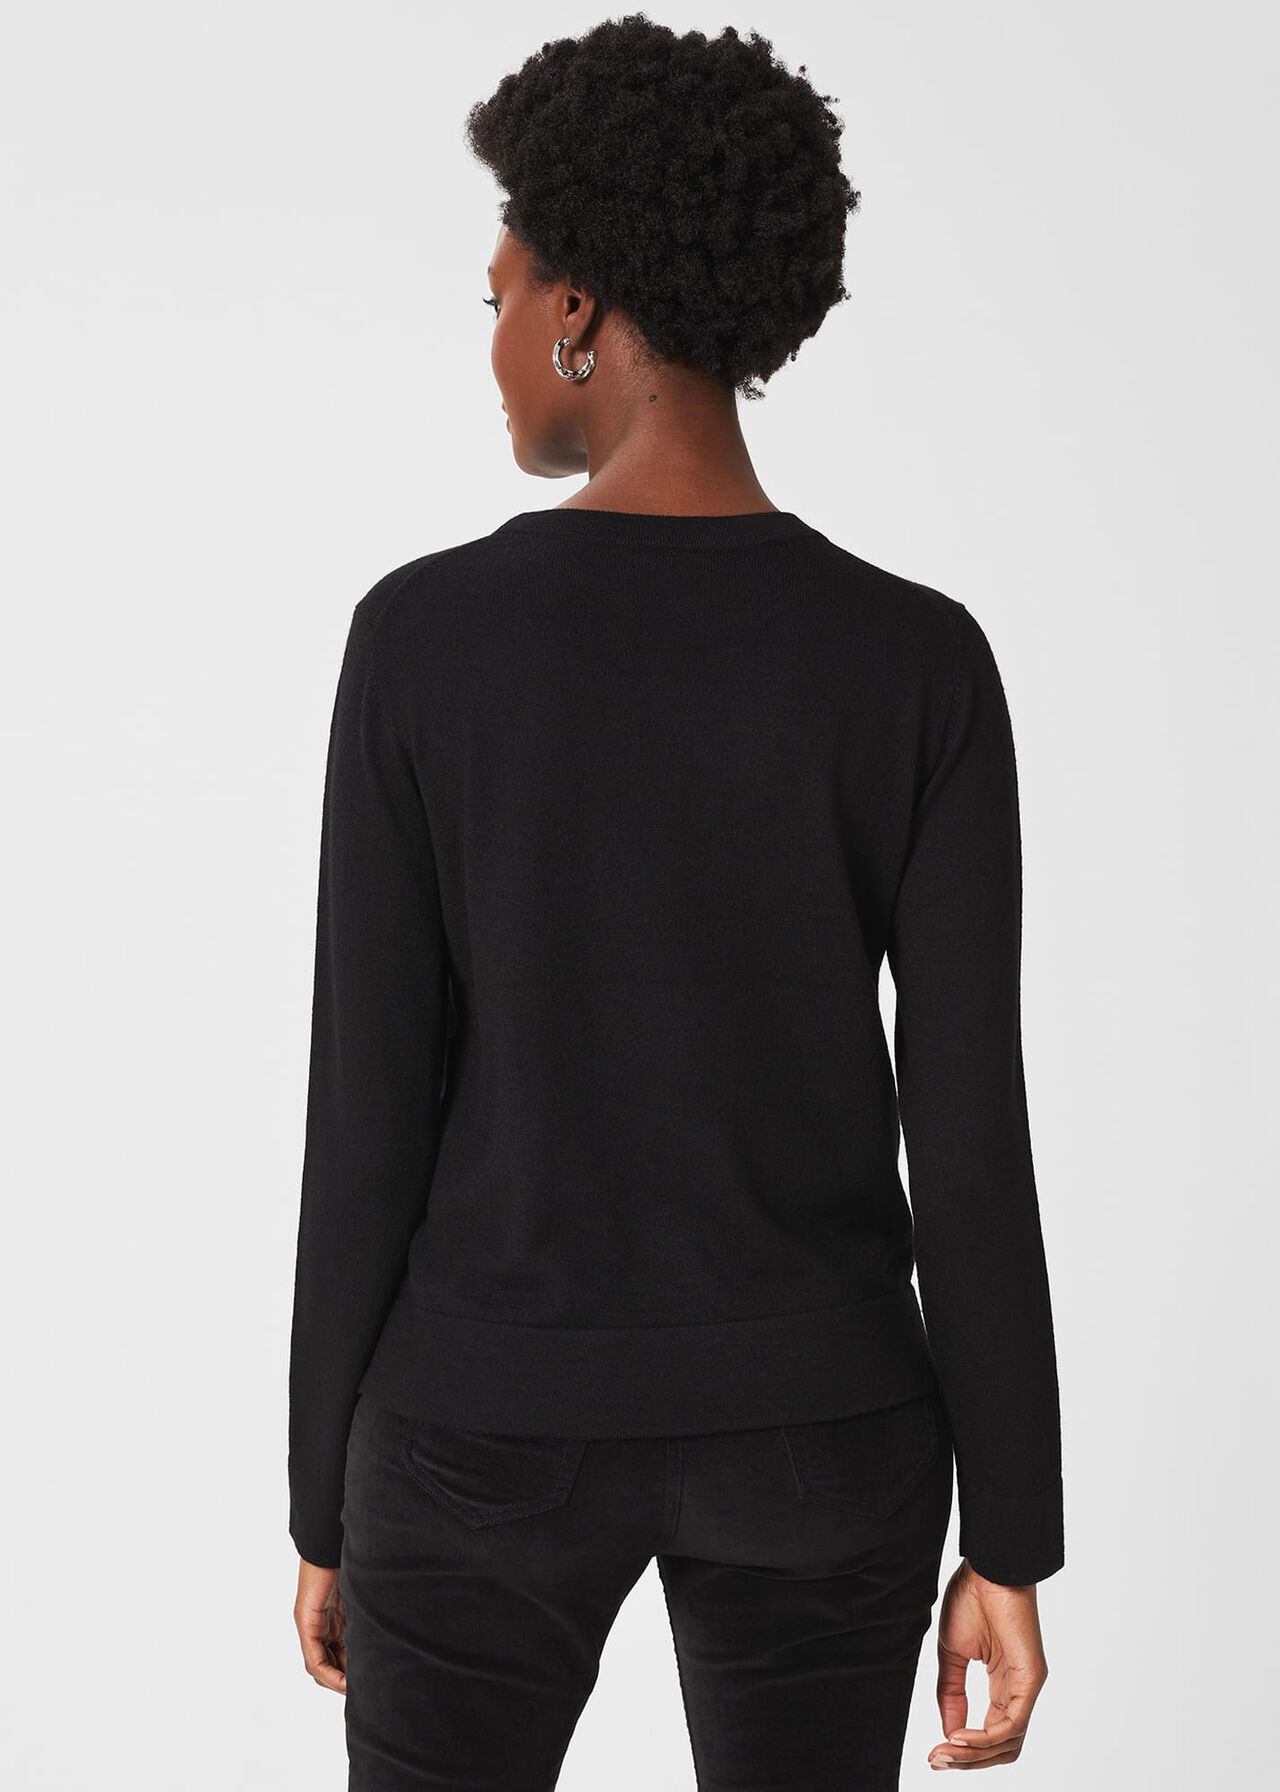 Cianna Shine Jumper with Wool, Black Gold, hi-res